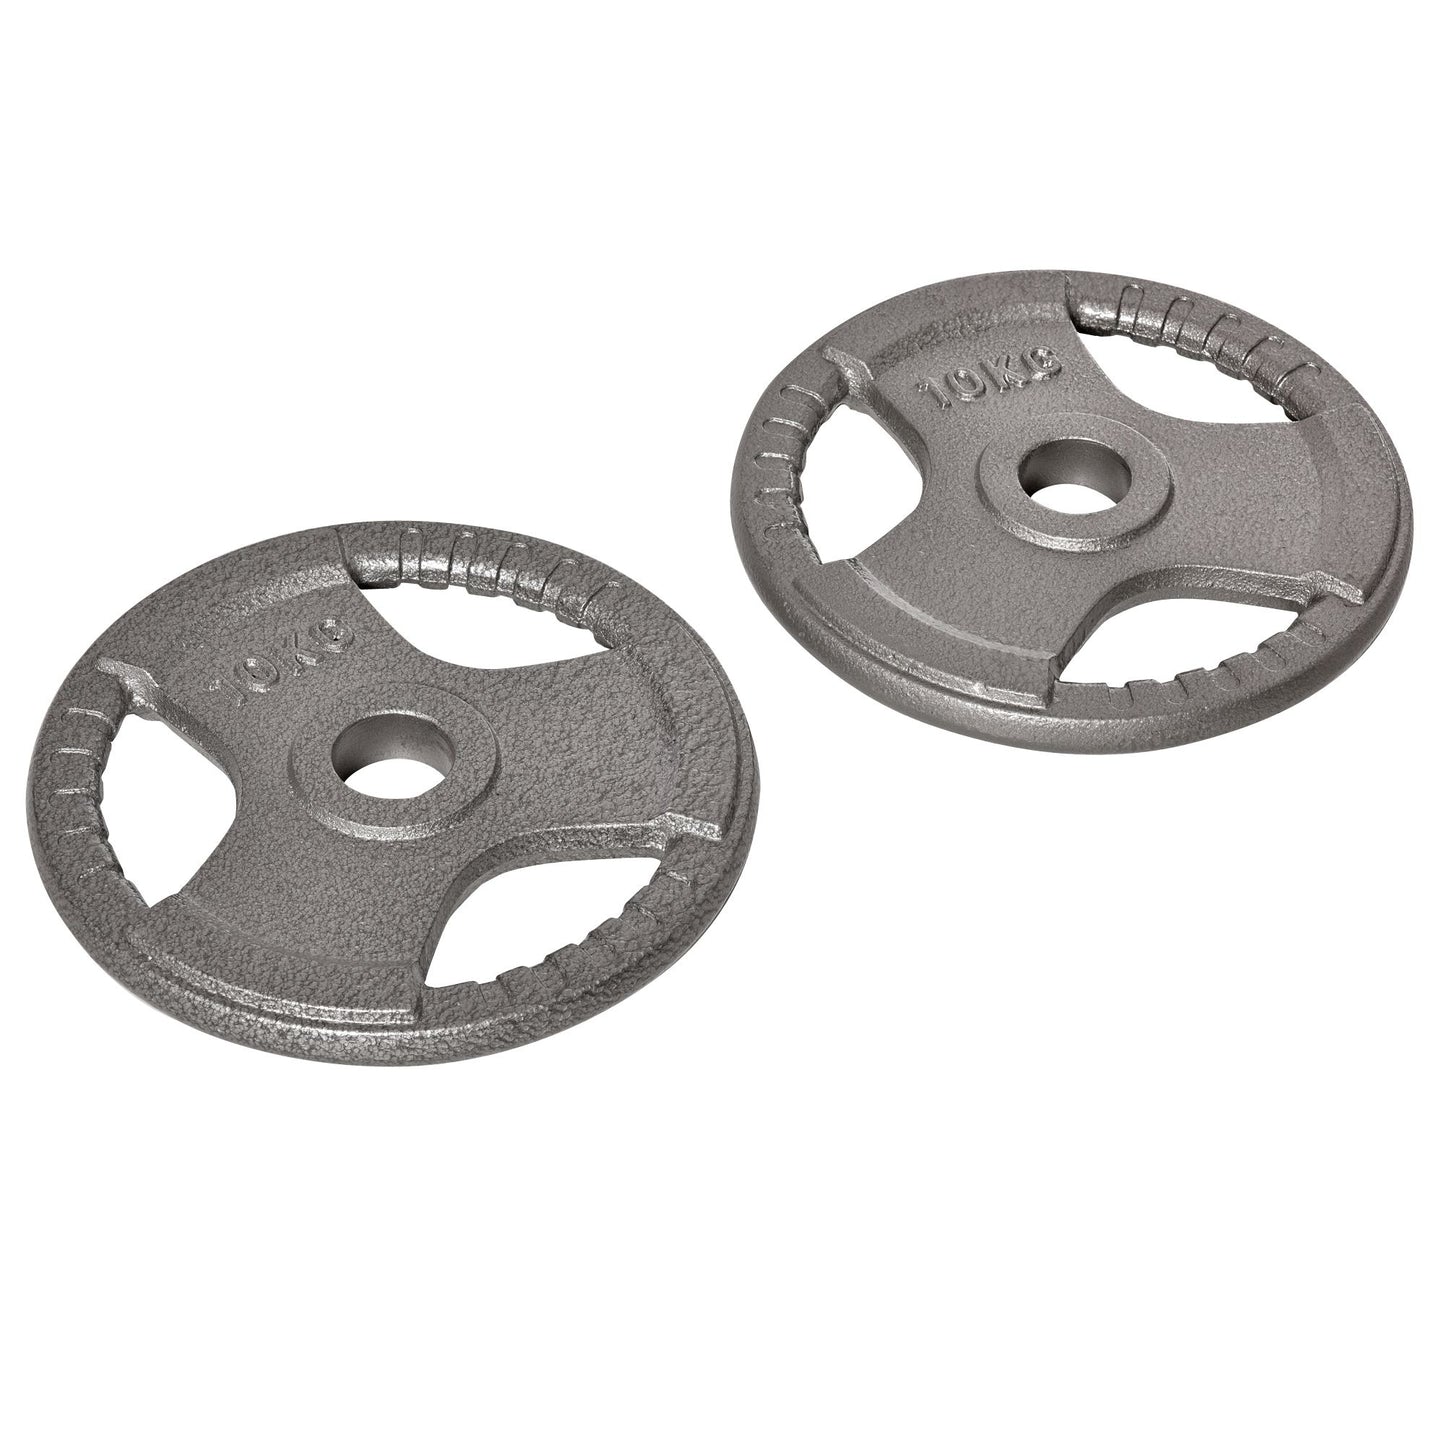 HOMCOM Olympic Weight Plates Sets for Strength and Crossfit and Weightliftin Training